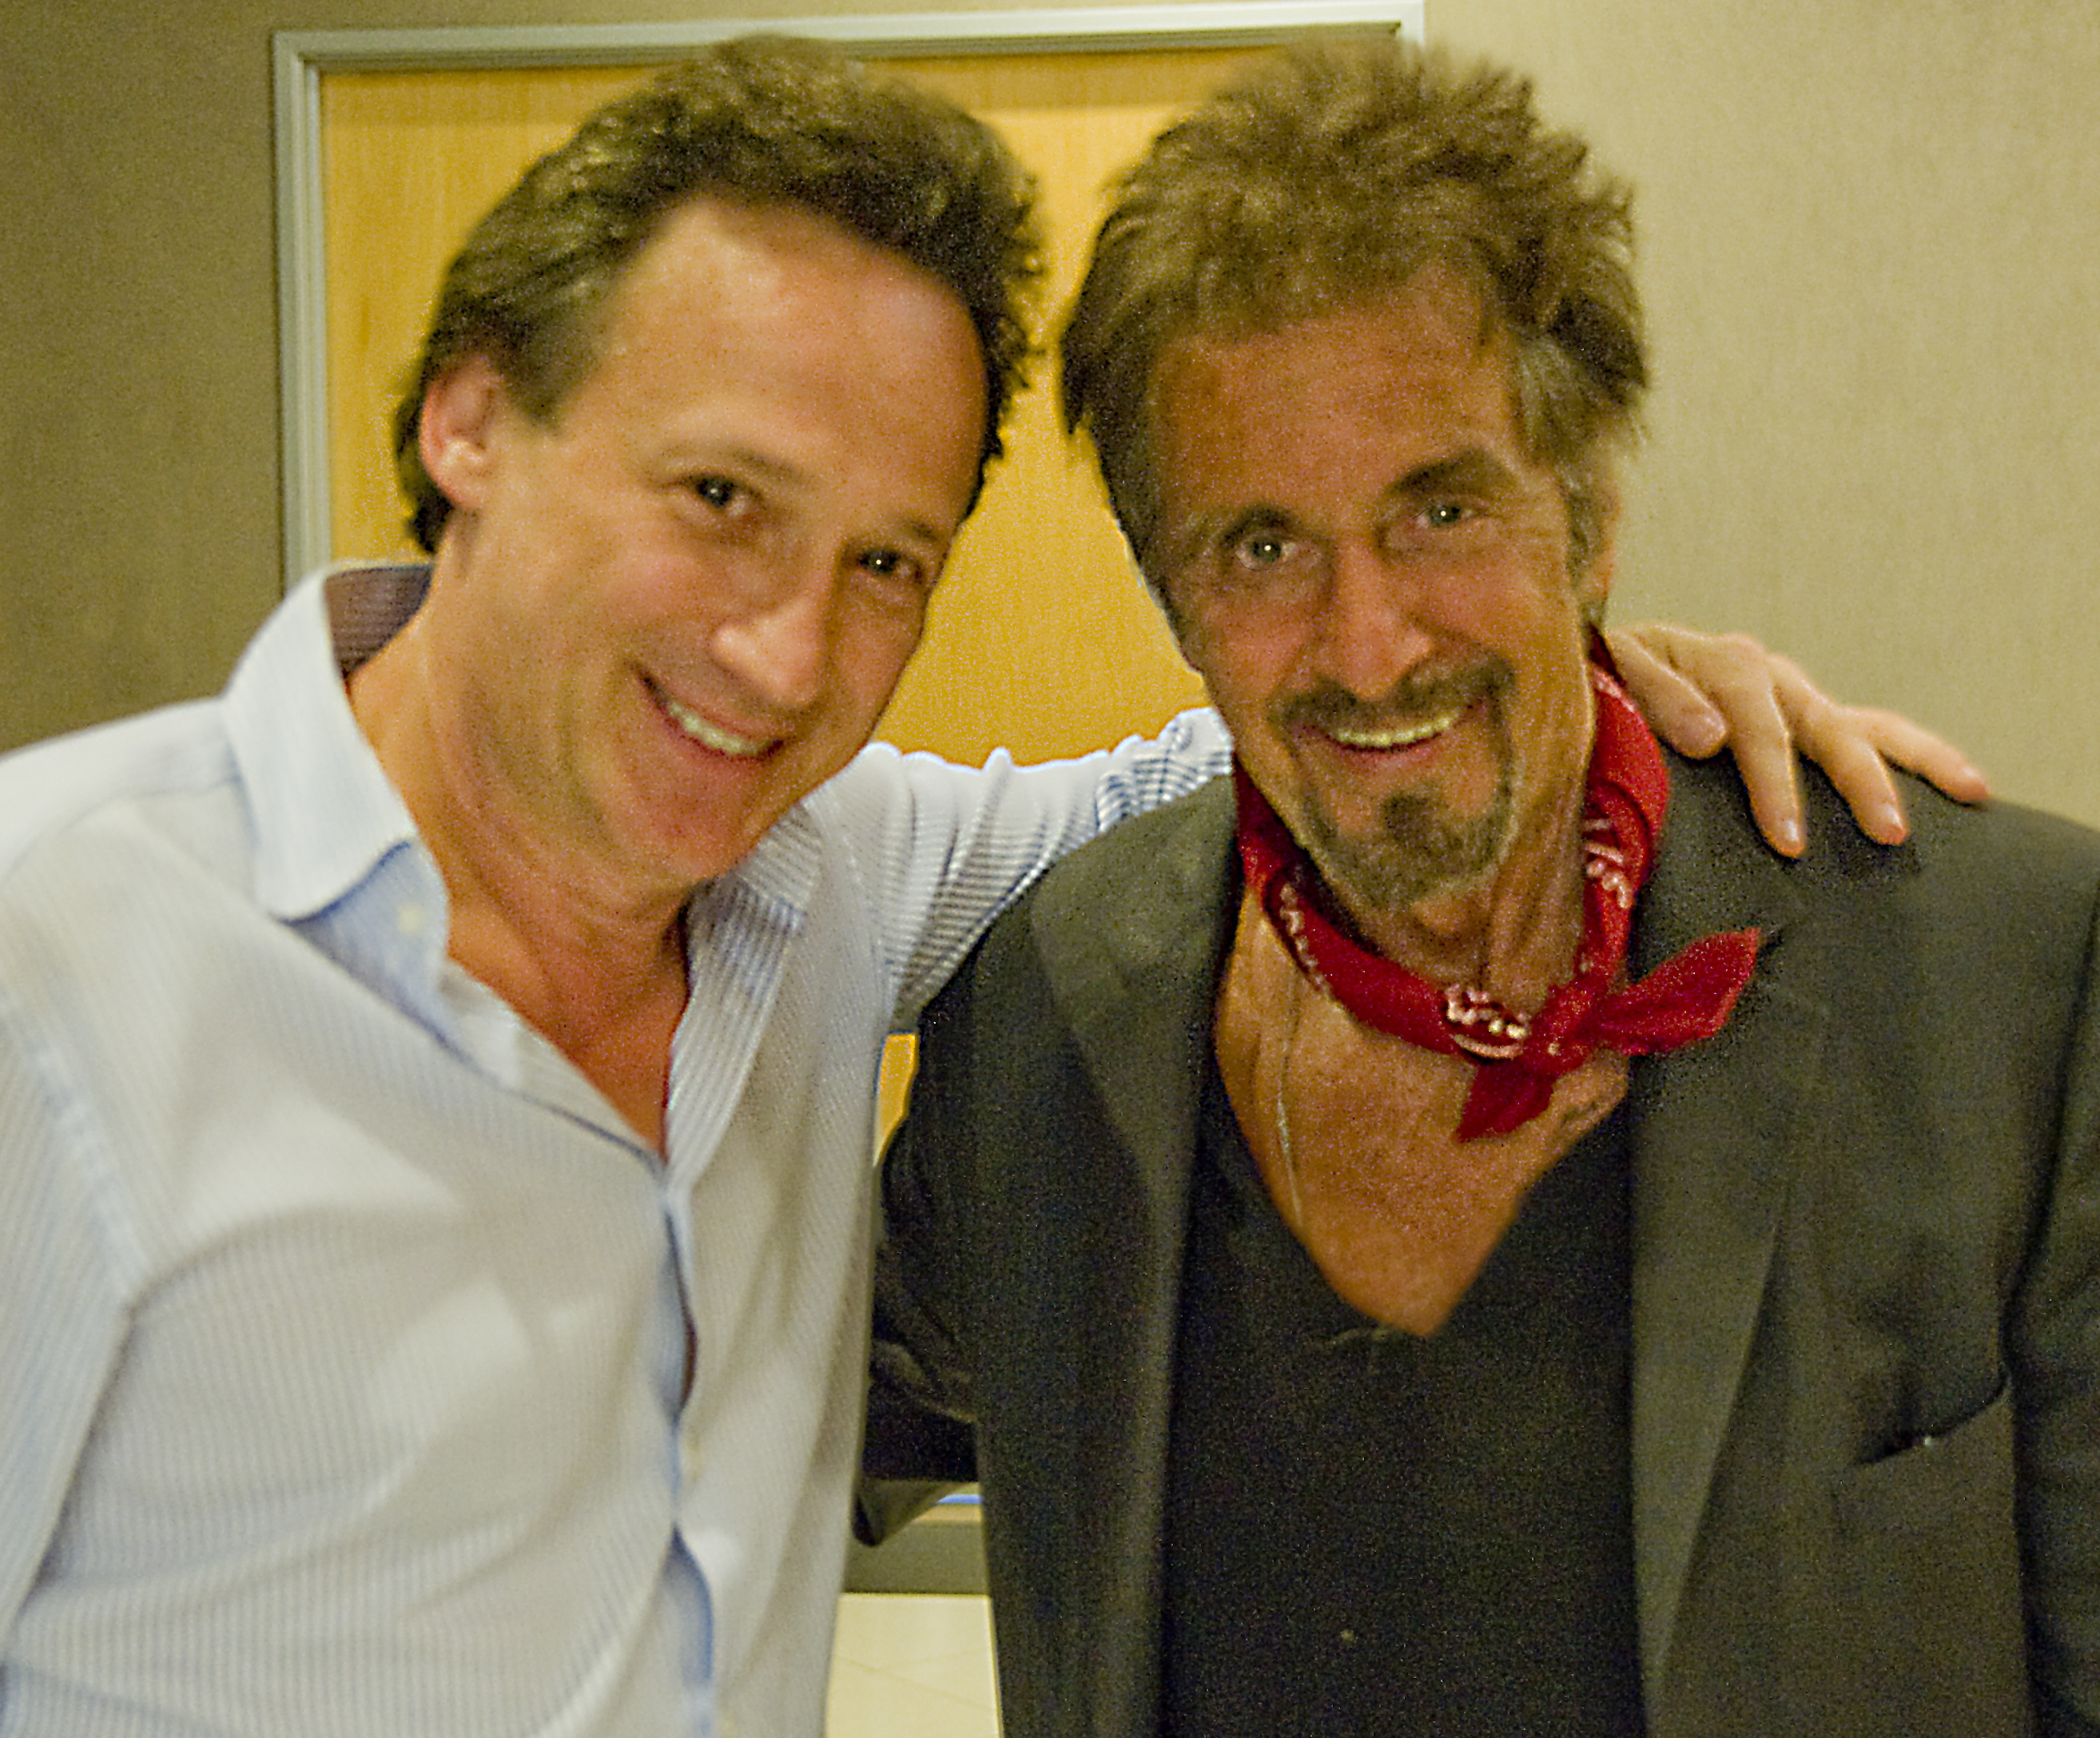 Legendary Al Pacino meets the Masterclass after a private screening of his new movie.